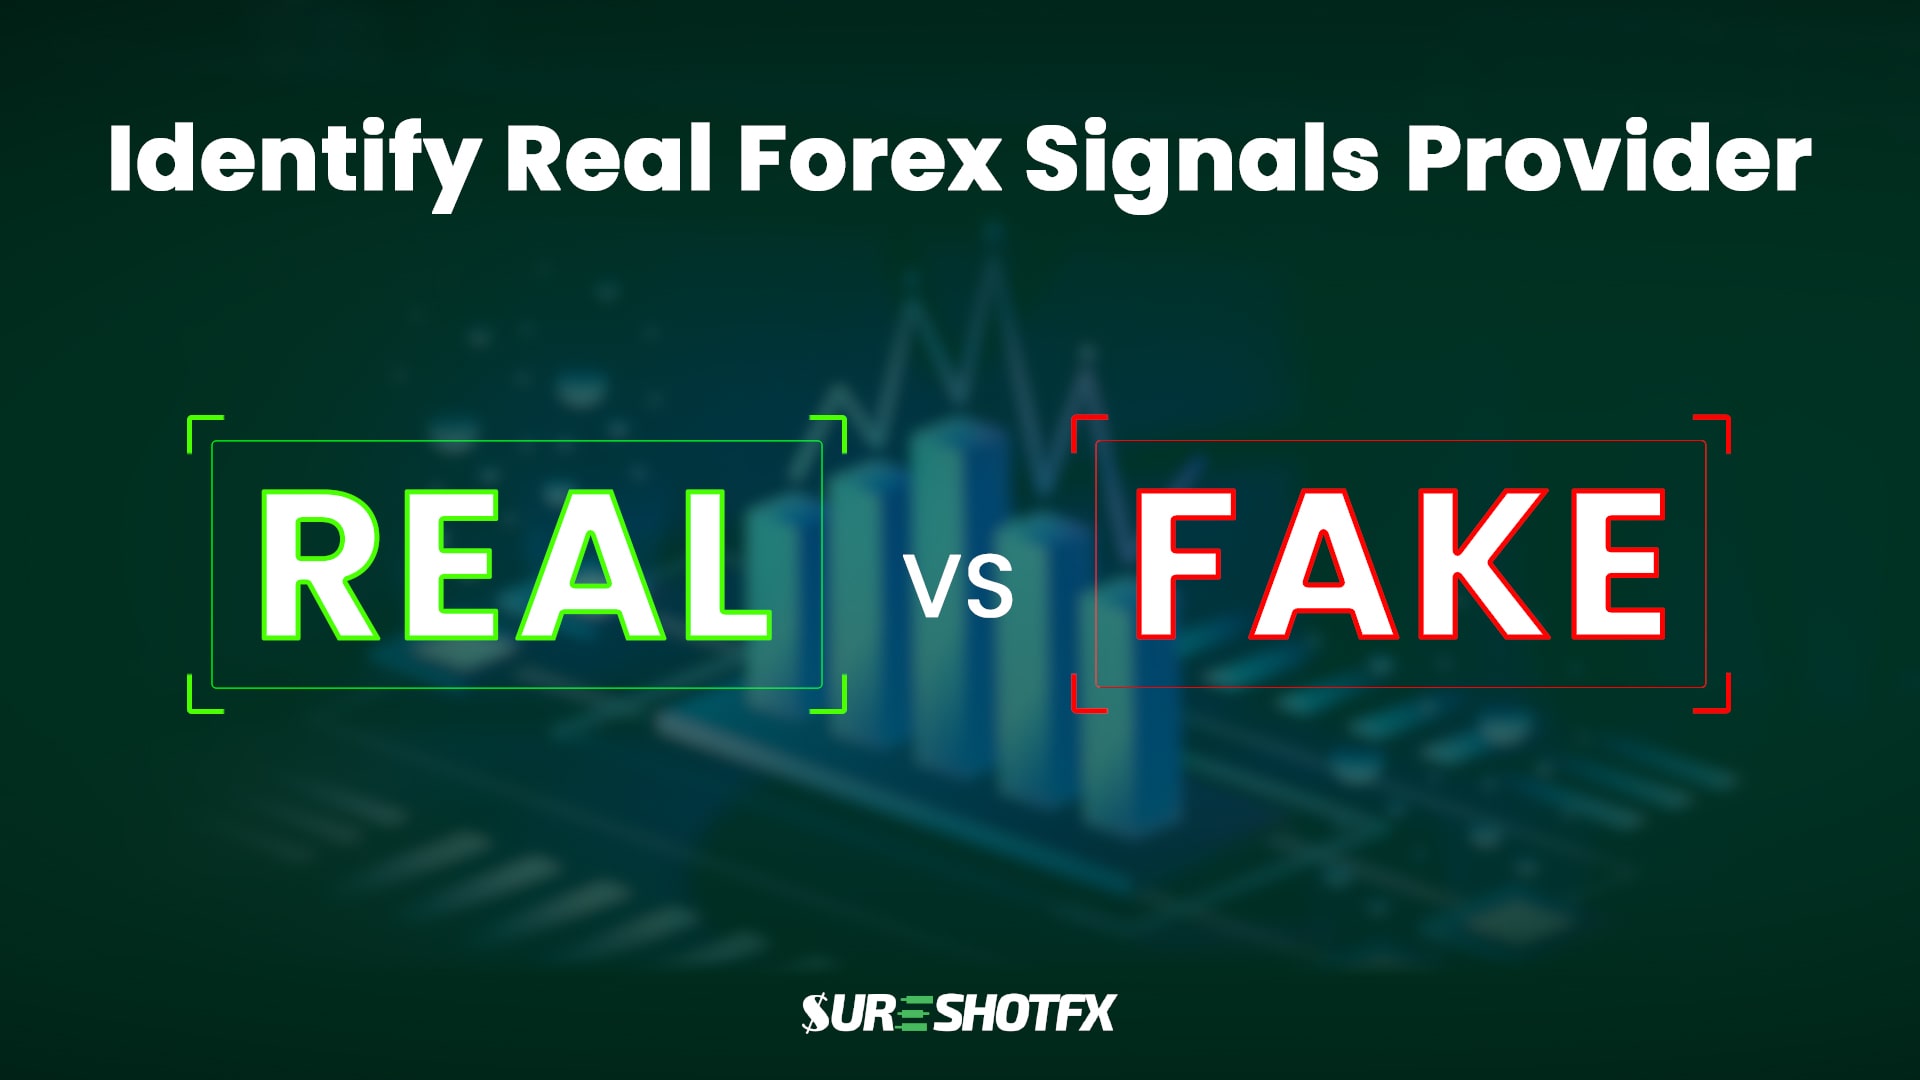 Sureshotfx real forex signal feature image depicting real vs fake.